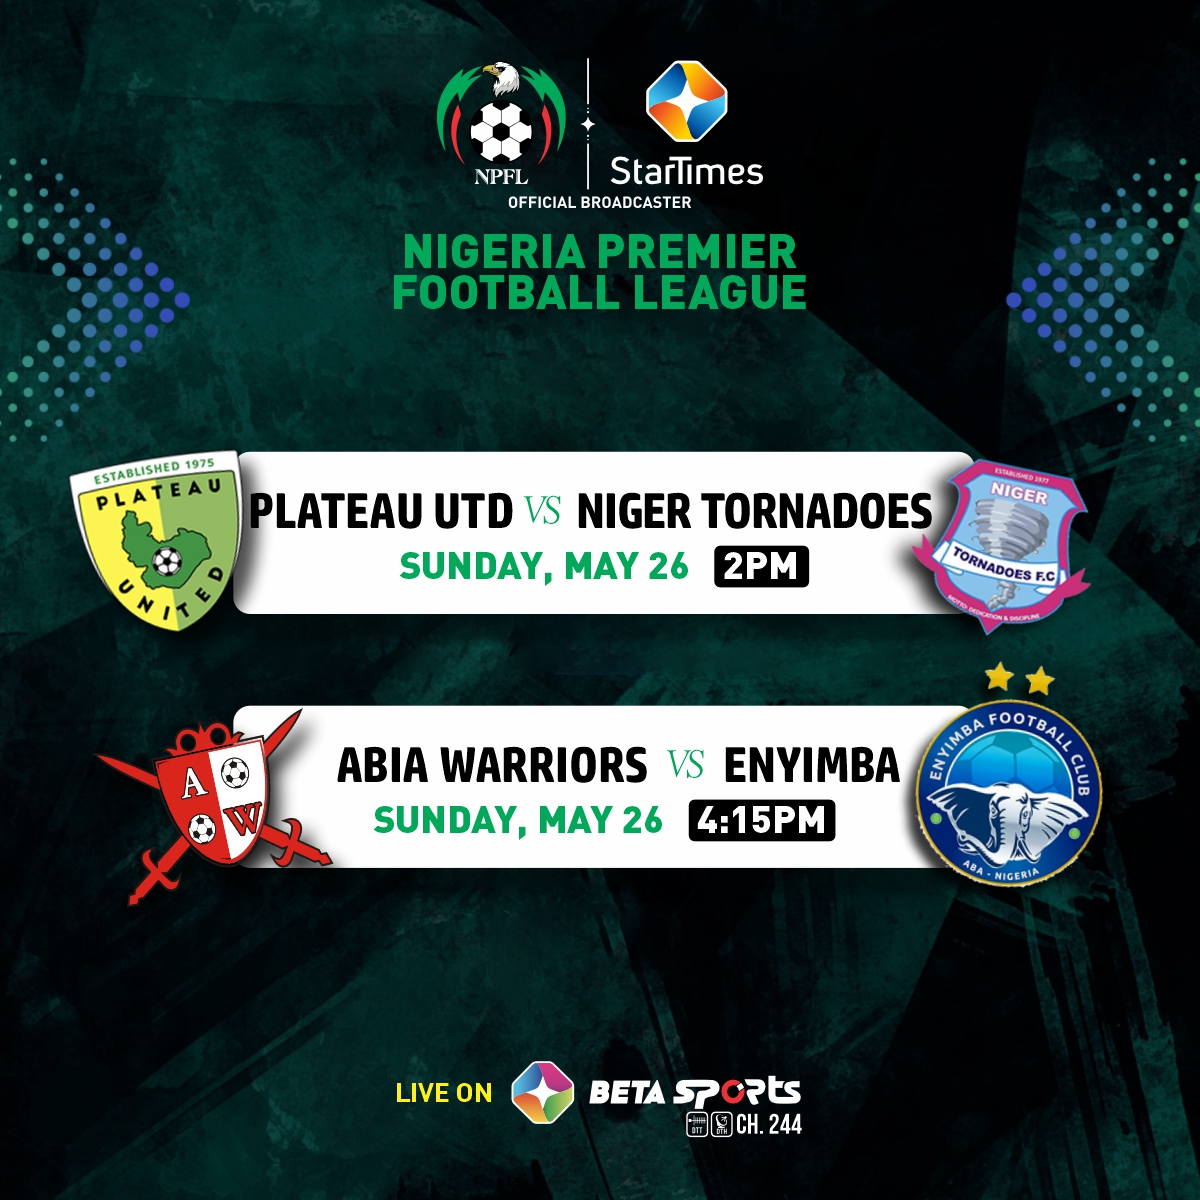 The Nigeria Premier Football League continues on Sunday, May 26. Catch all the action on Beta Sports CH 244, only on #StarTimesSports. #npfl24 #npfl #football #naijasports #StarTimesSports